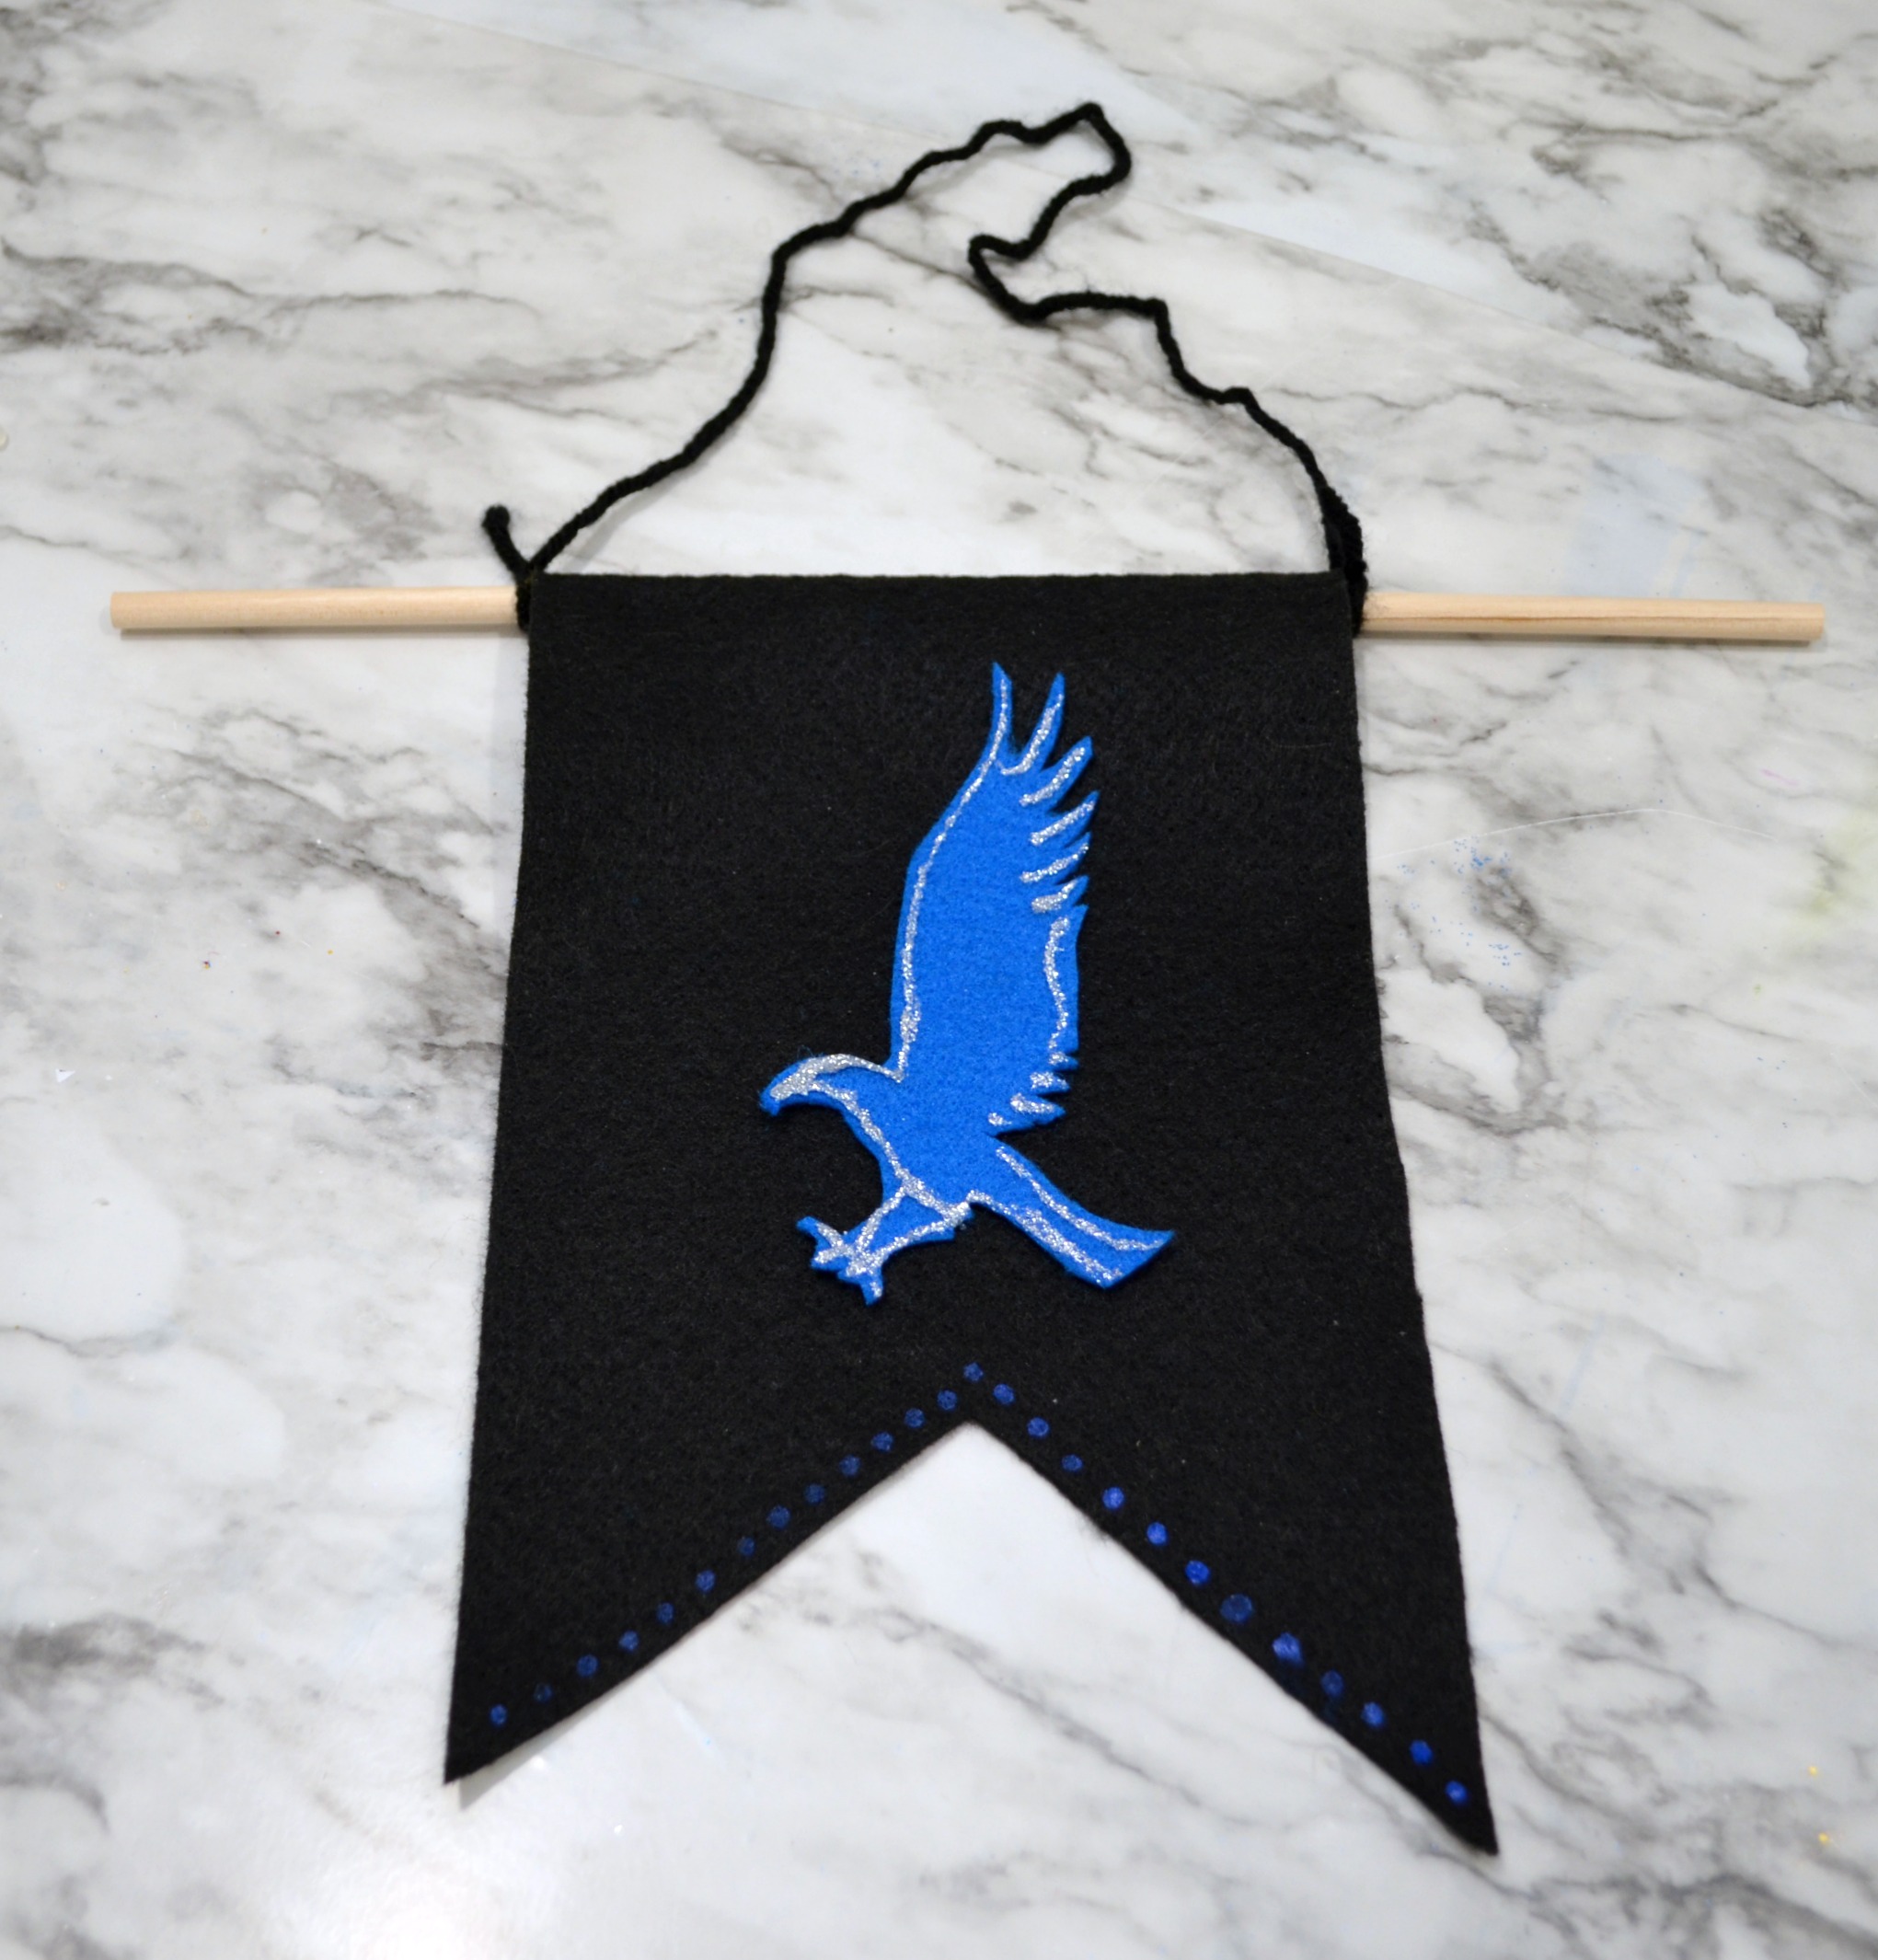 DIY: HOGWARTS HOUSE BANNERS Step by Step instructions with free printouts  on making Slyther…